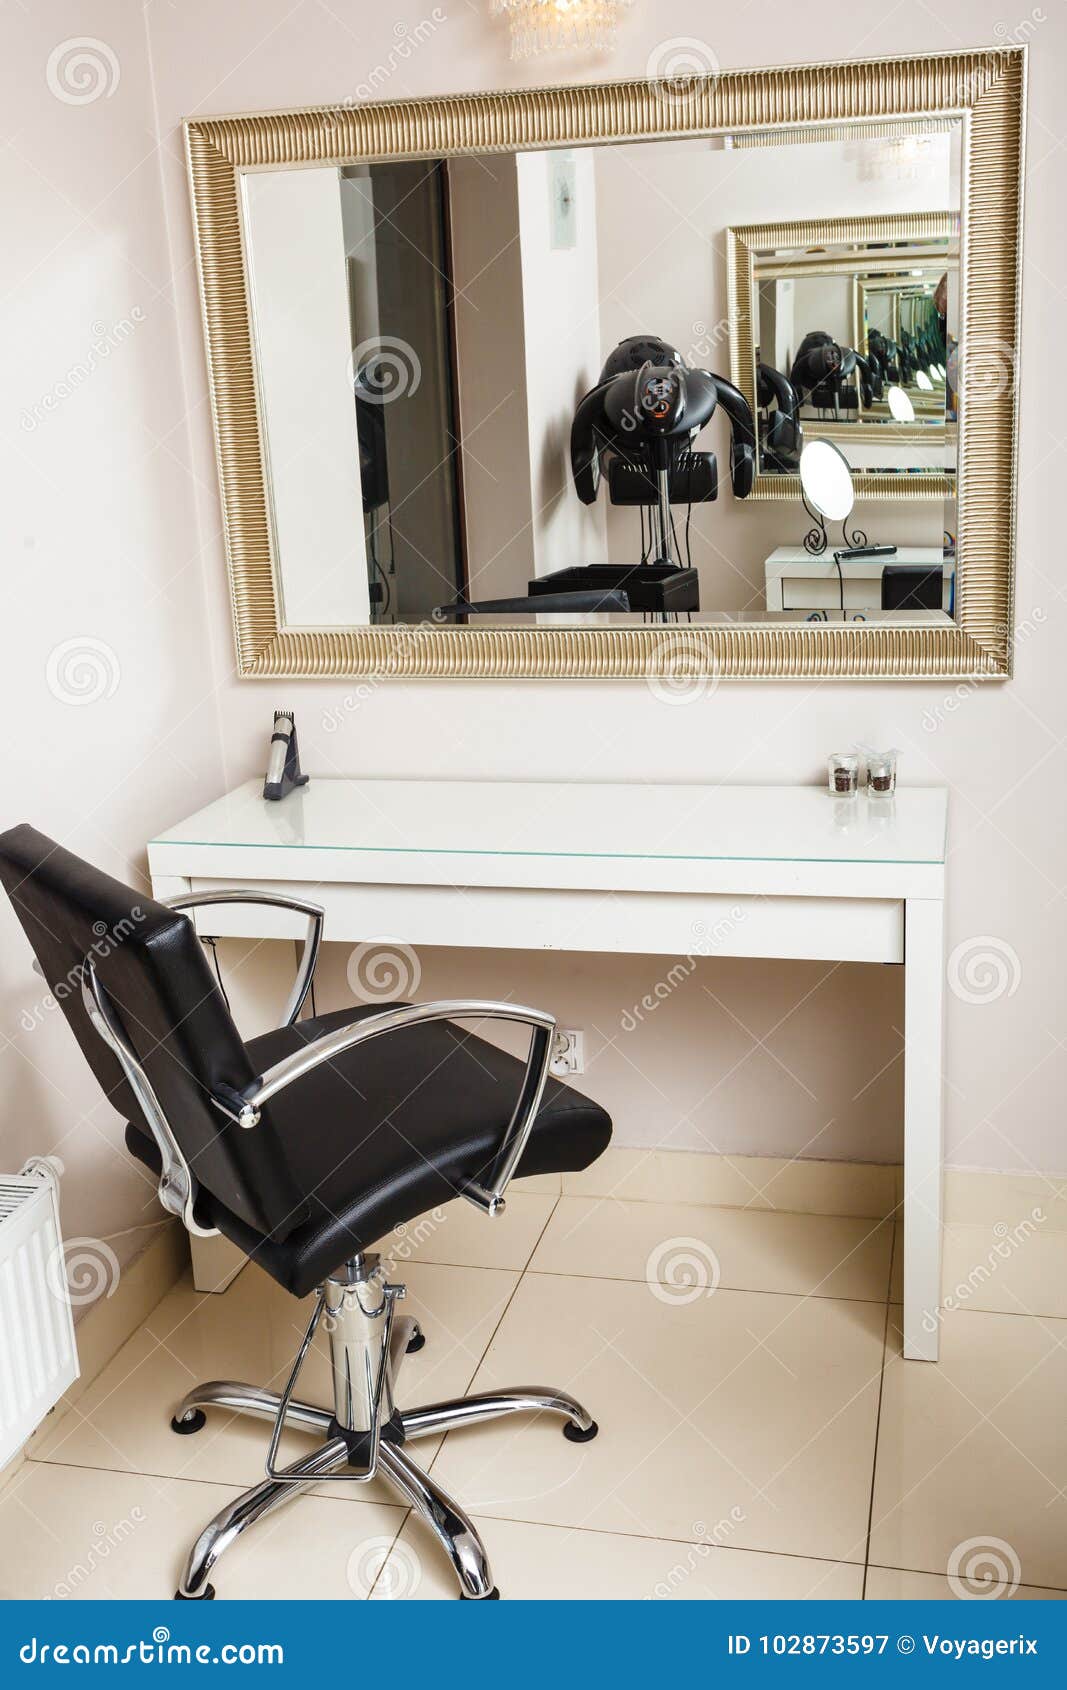 Chair and Mirror in Hairdresser Salon Stock Image - Image of salon,  barbershop: 102873597